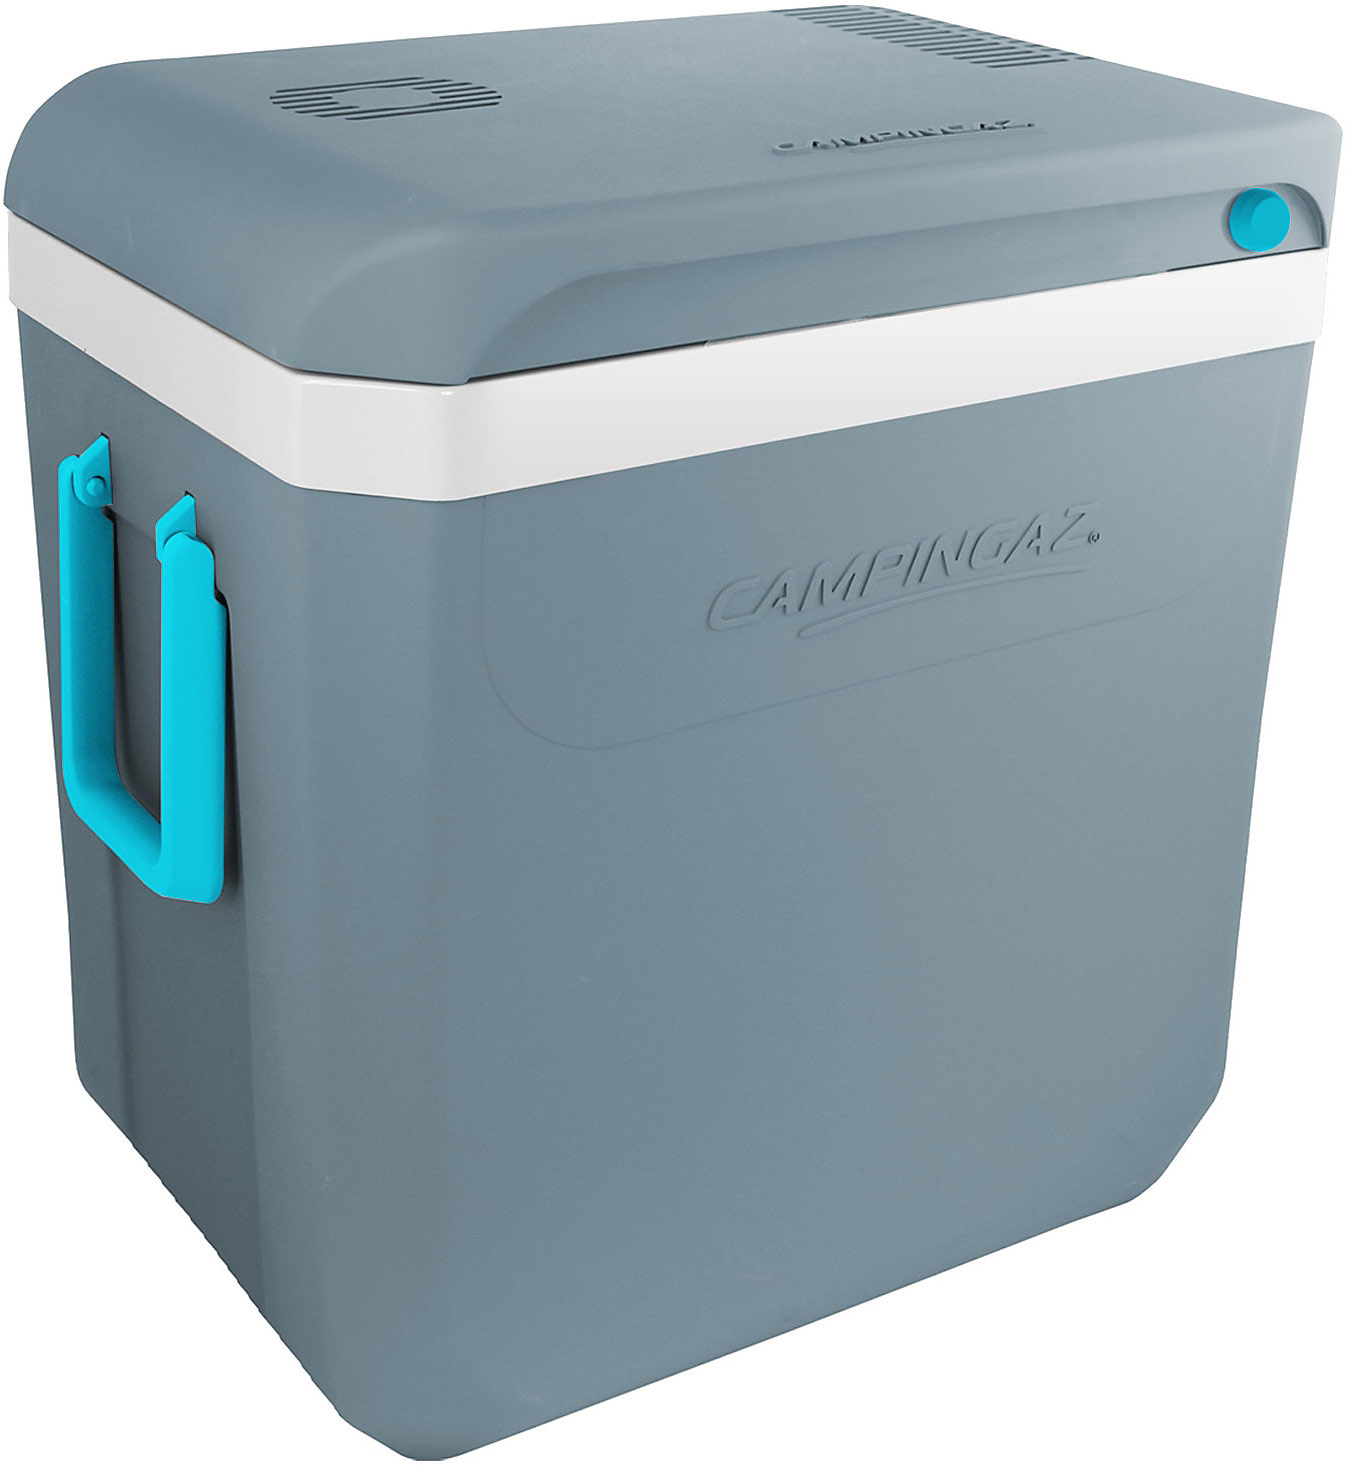 Thermoelectric cooler